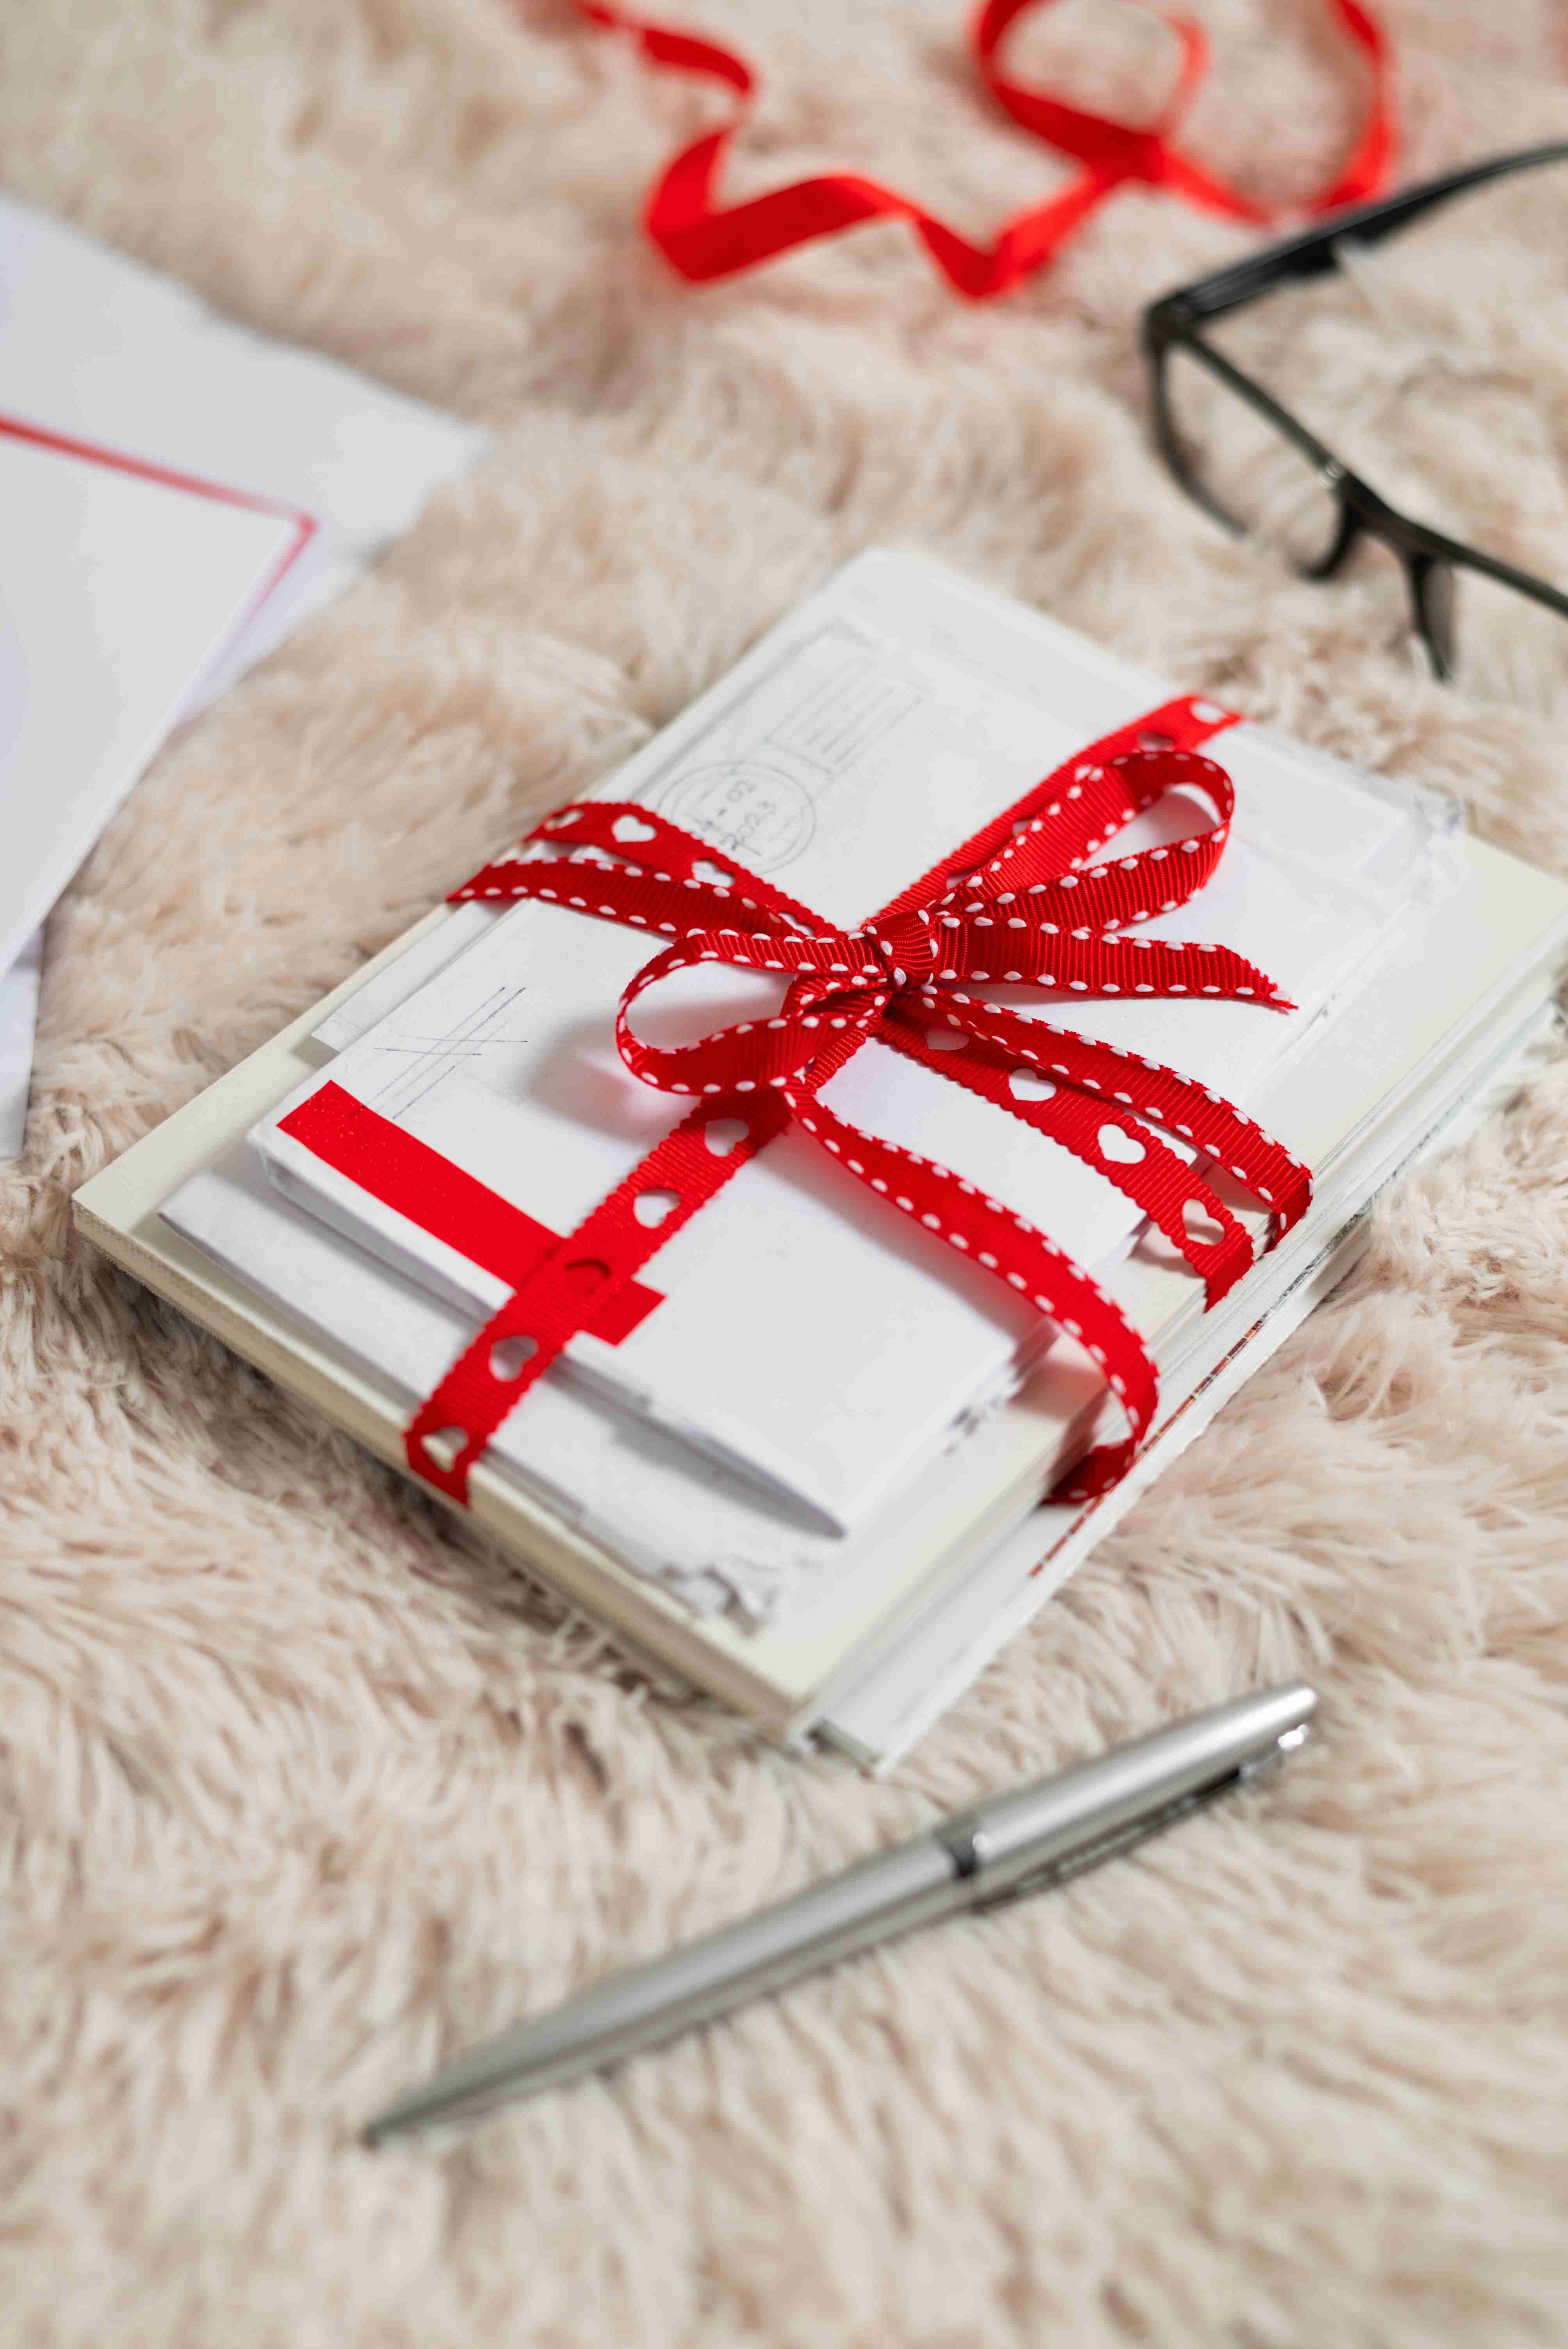 Gifts and exemptions from inheritance tax